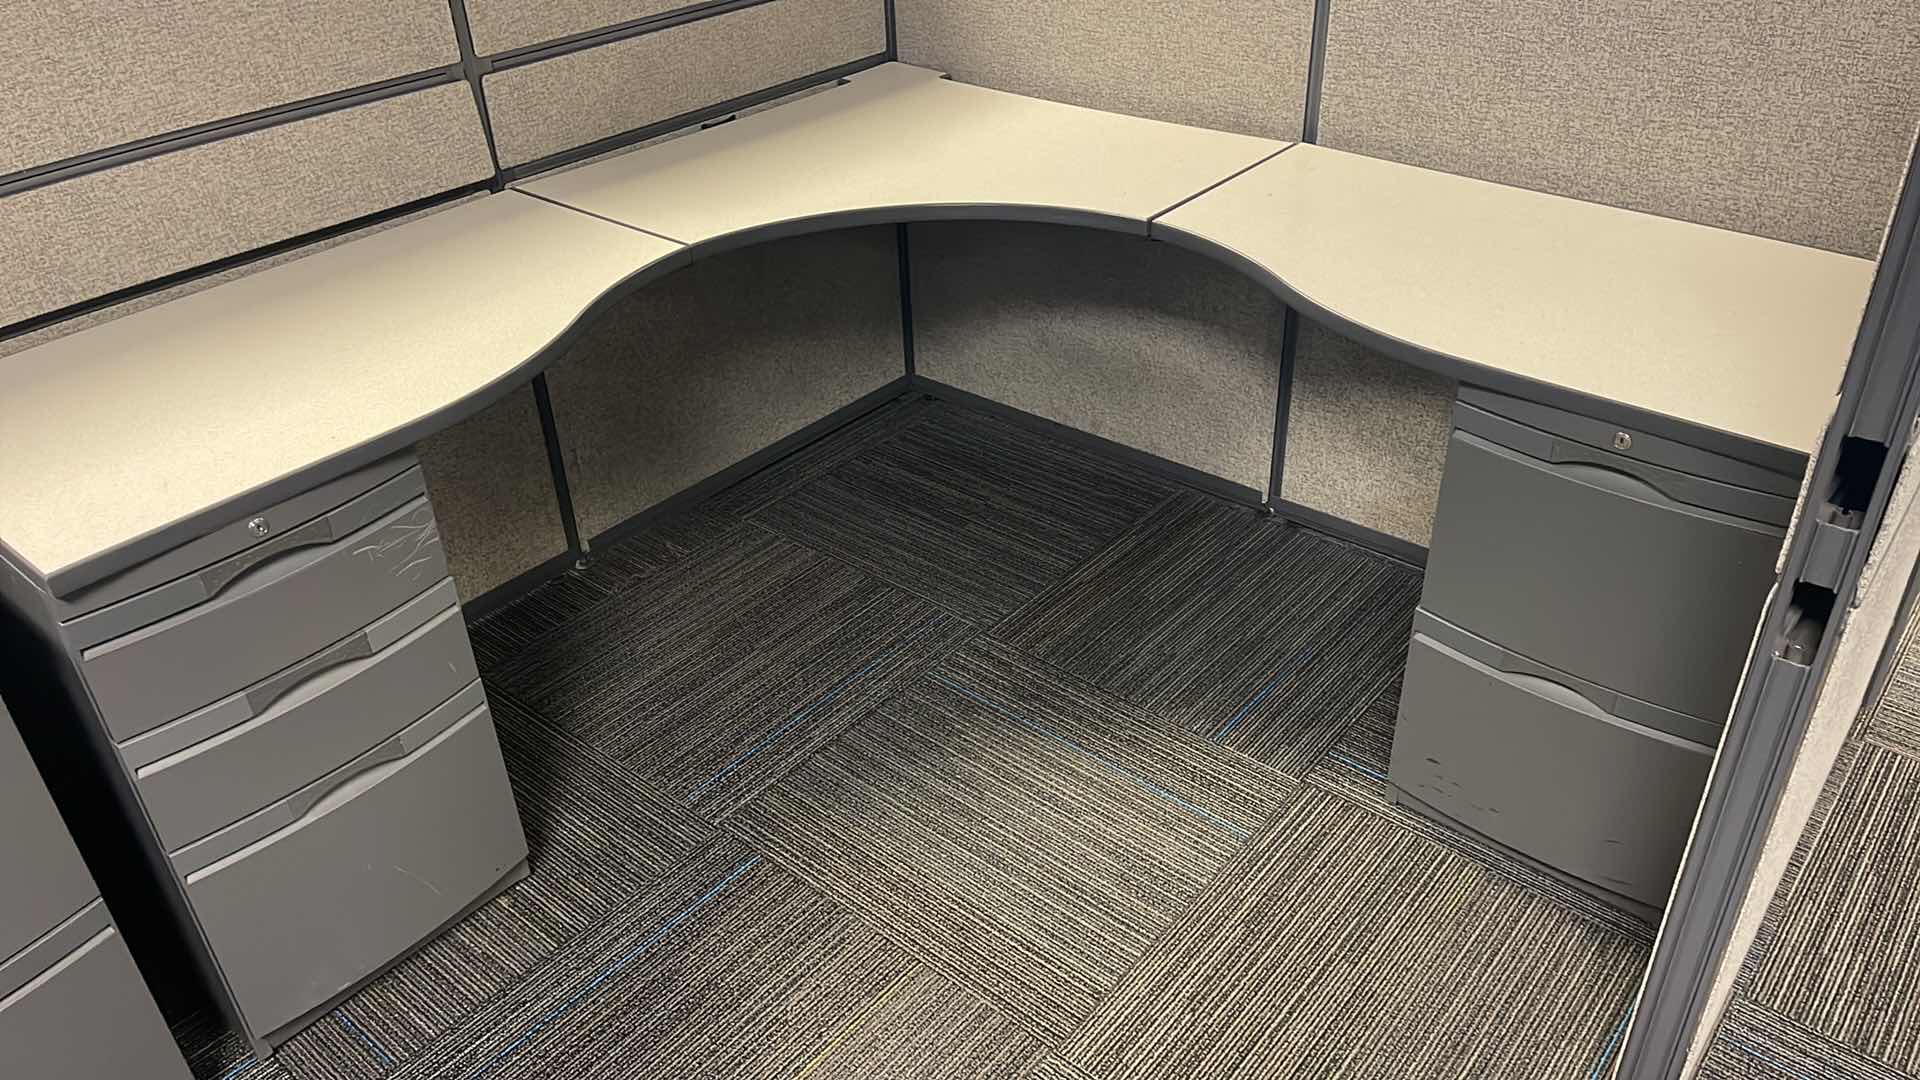 Photo 3 of 3 PC CUBICLE SET W 5 DRAWER MEDAL BASE DESKS 2 CUBICLES 76” X 76” H50” 1 CUBICLE 12’ X 76” H50”(BUYER TO DISASSEMBLE & REMOVE FROM 2ND STORY OFFICE BUILDING W ELEVATOR)